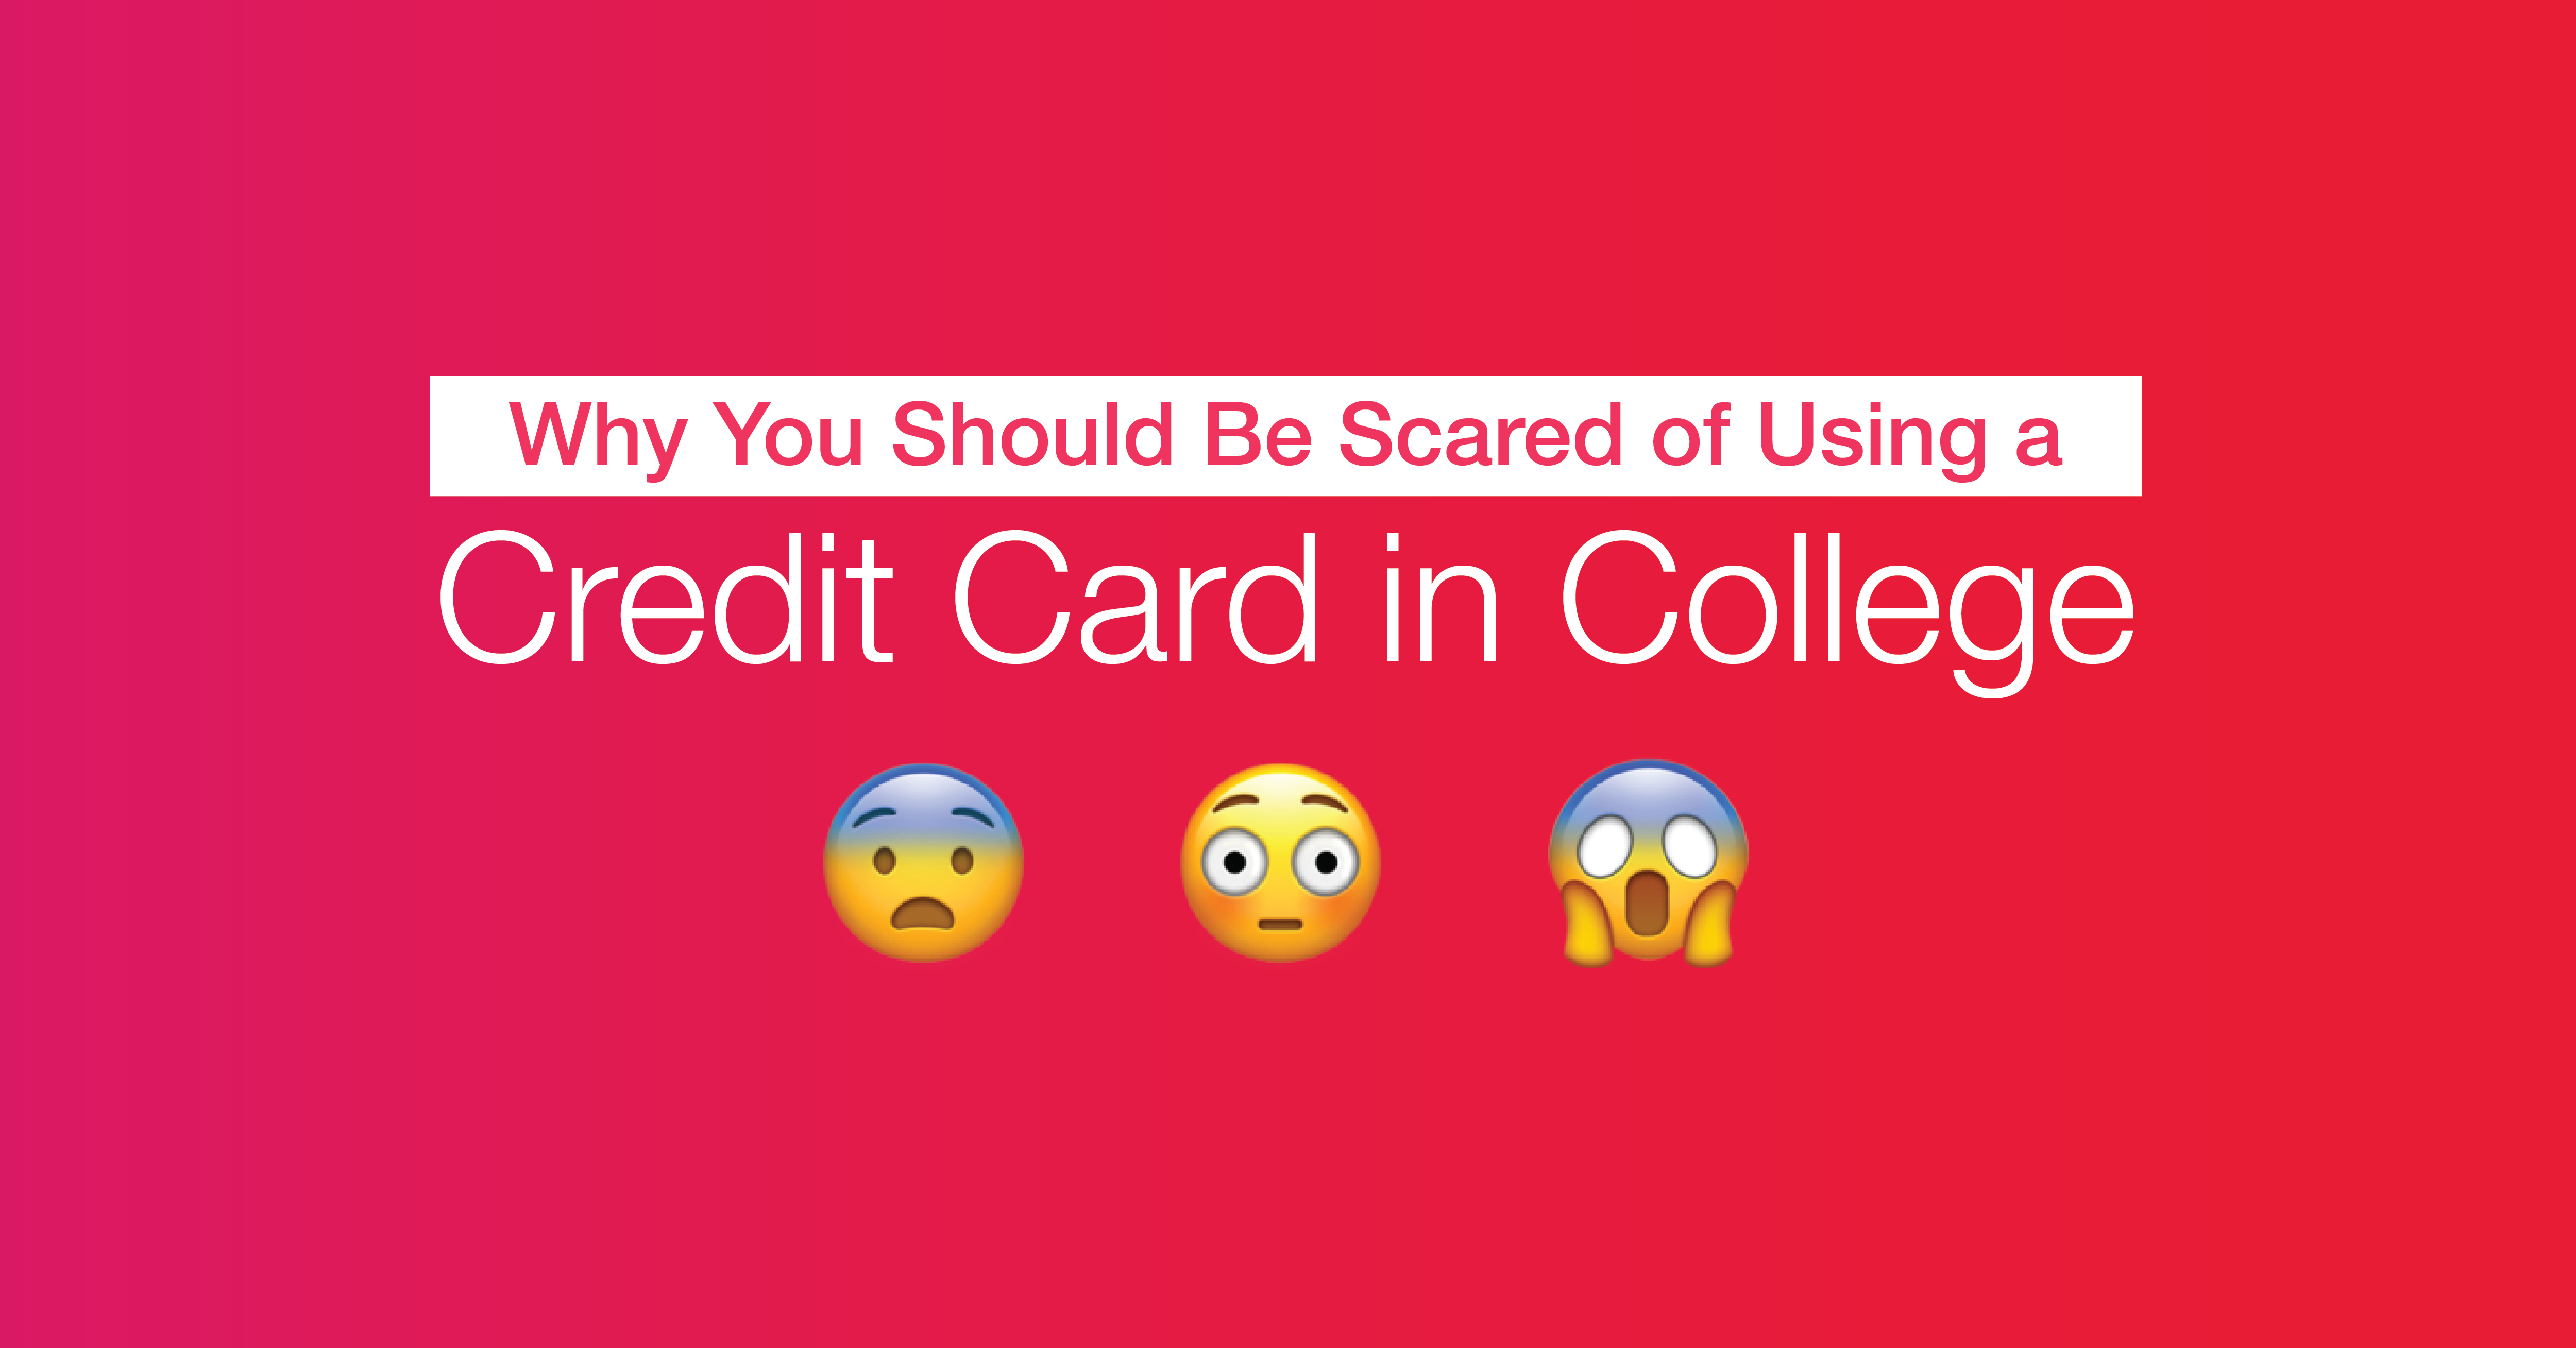 Why You Should Be Scared of Using a Credit Card in College